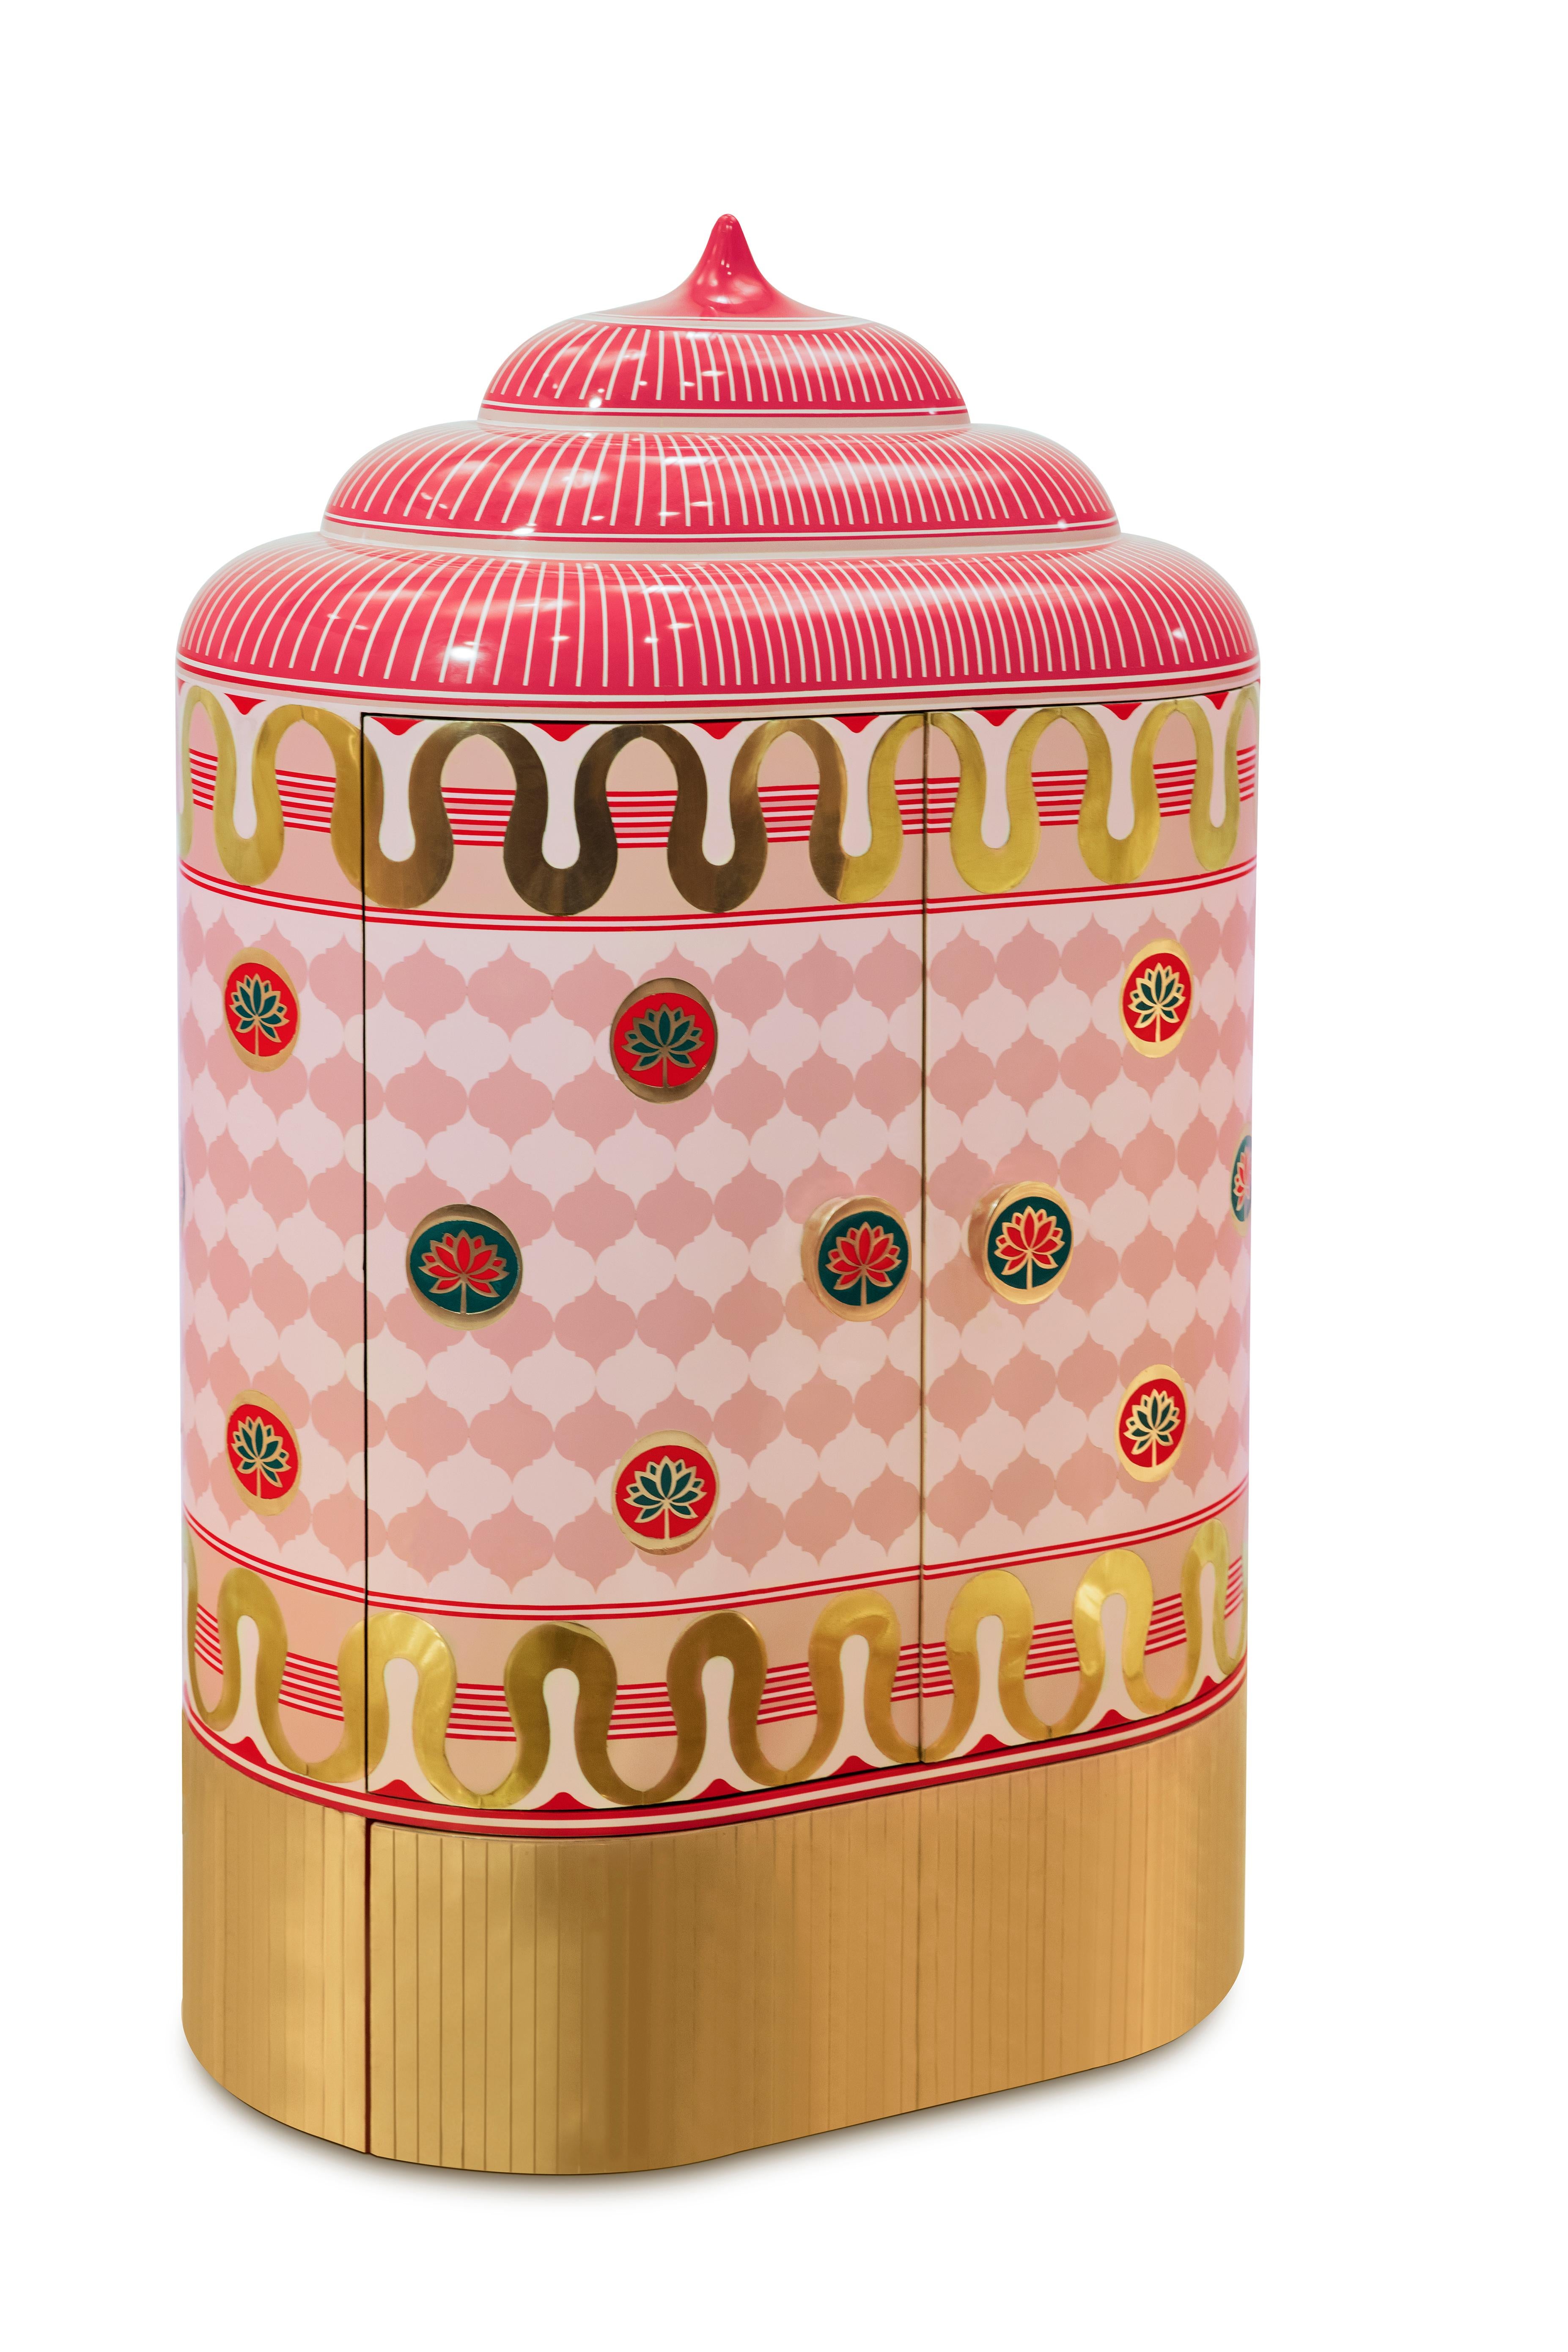 Lotus Sanctum Pink Storage Cabinet with Brass Inlay by Matteo Cibic is a versatile cabinet inspired by the purity of the lotus. Burnished brass walls and pillars within anticipate a glowing revelation. Available in two colors.

Each piece from this